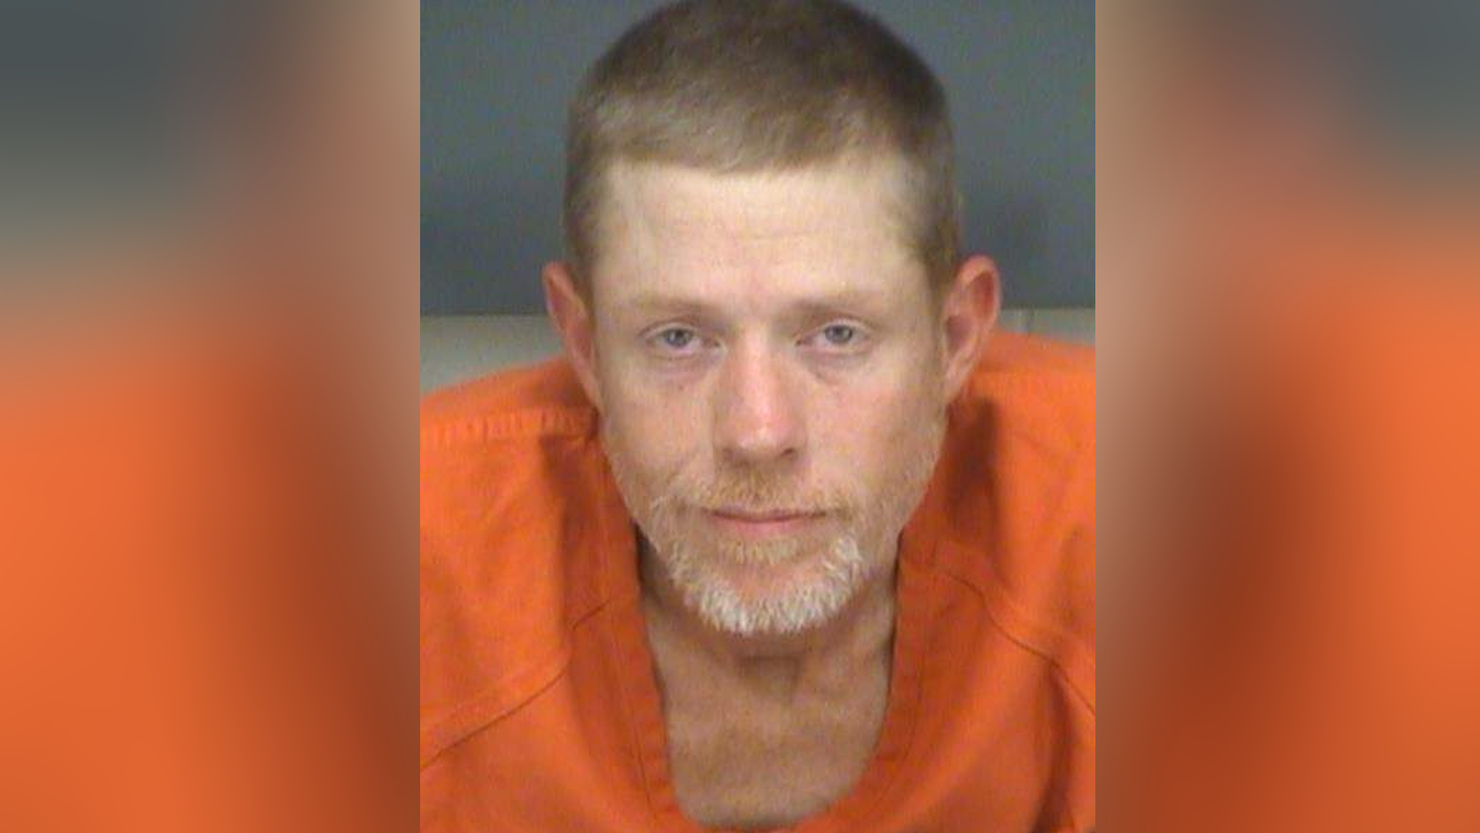 Florida man claims three syringes found in rectum don't belong to him